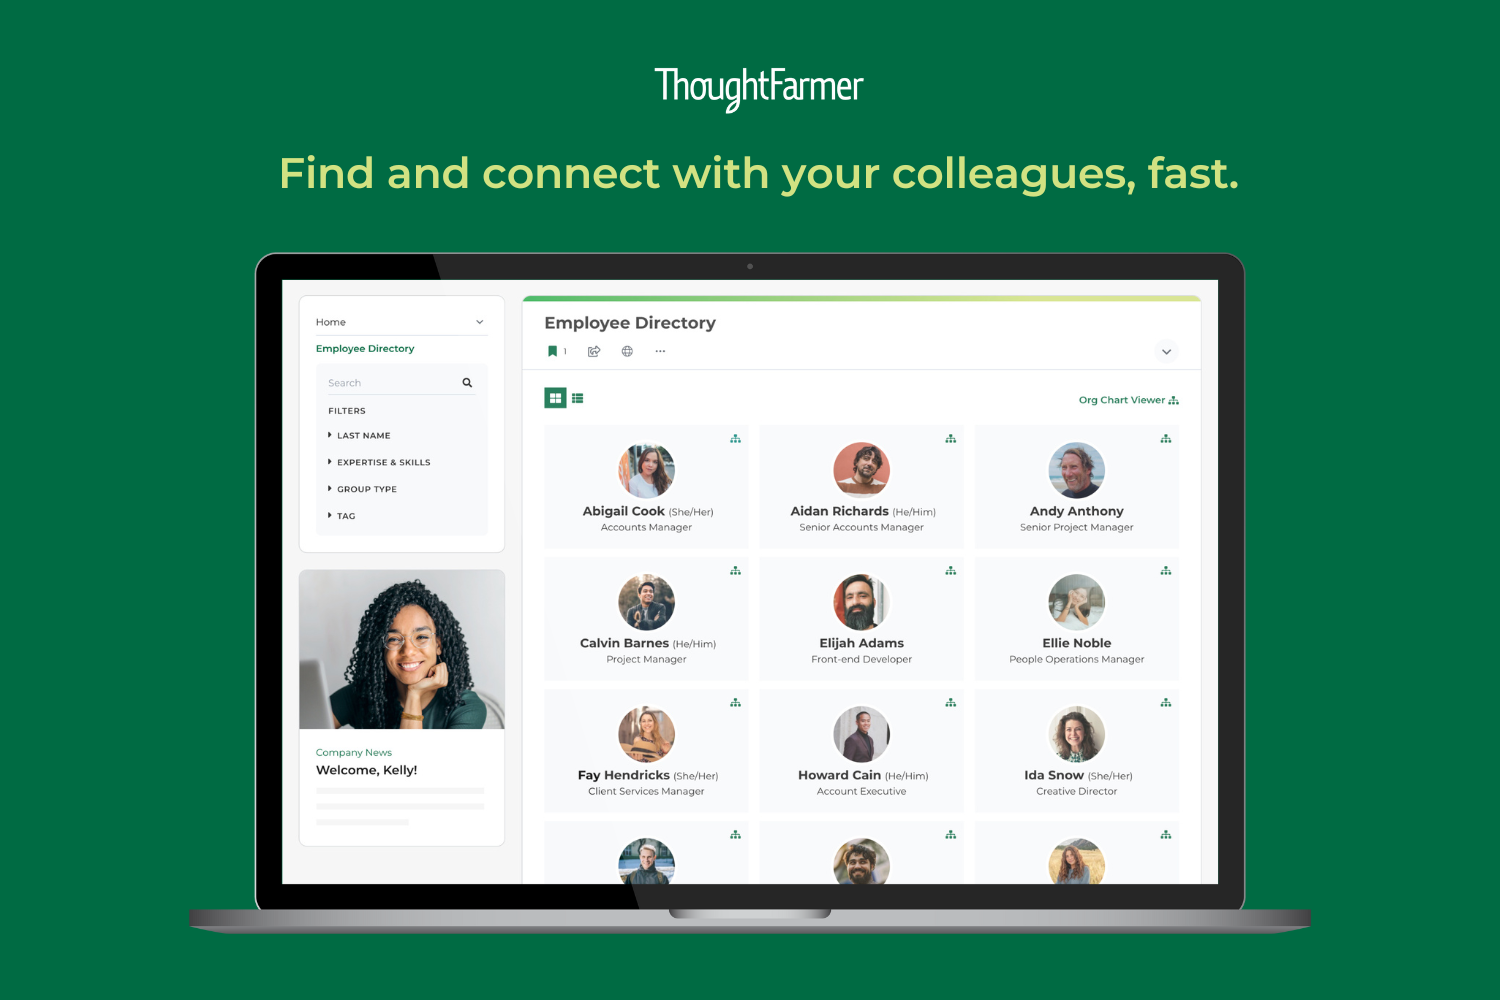 ThoughtFarmer Software - ThoughtFarmer's comprehensive people directory mean you can find and connect with subject matter experts, quickly